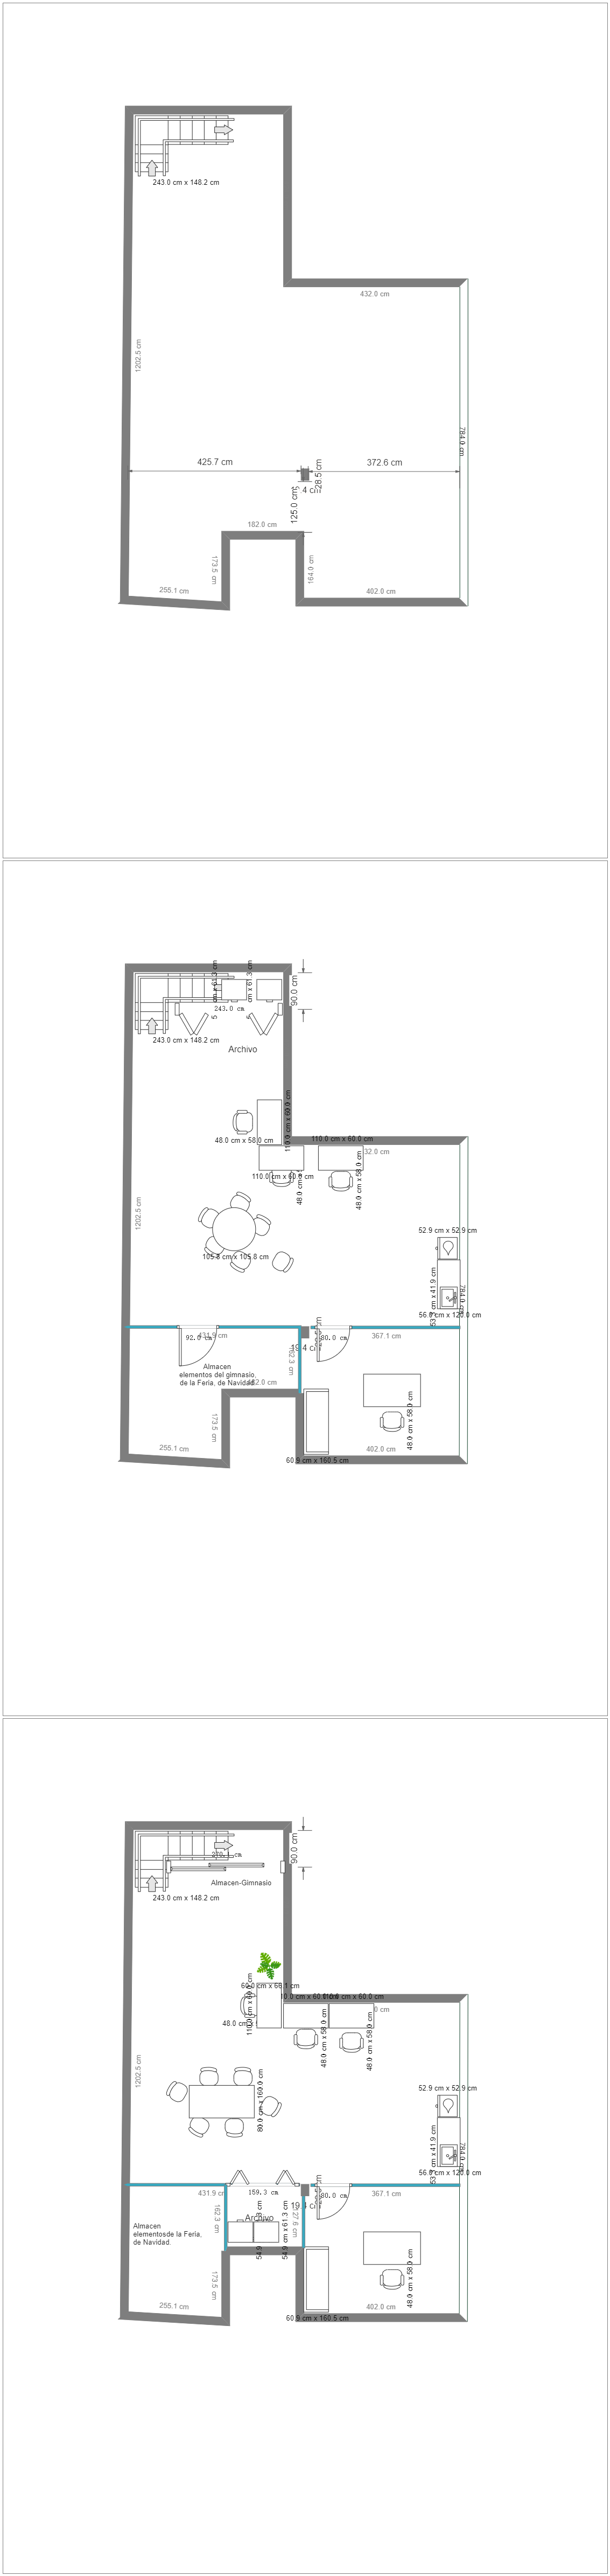 Here is a floor plan for a double-floor house. Floor plans are one such tool that bond between physical features such as rooms, spaces, and entities like furniture in the form of a scale drawing. In short, it is an architectural depiction of a building. L